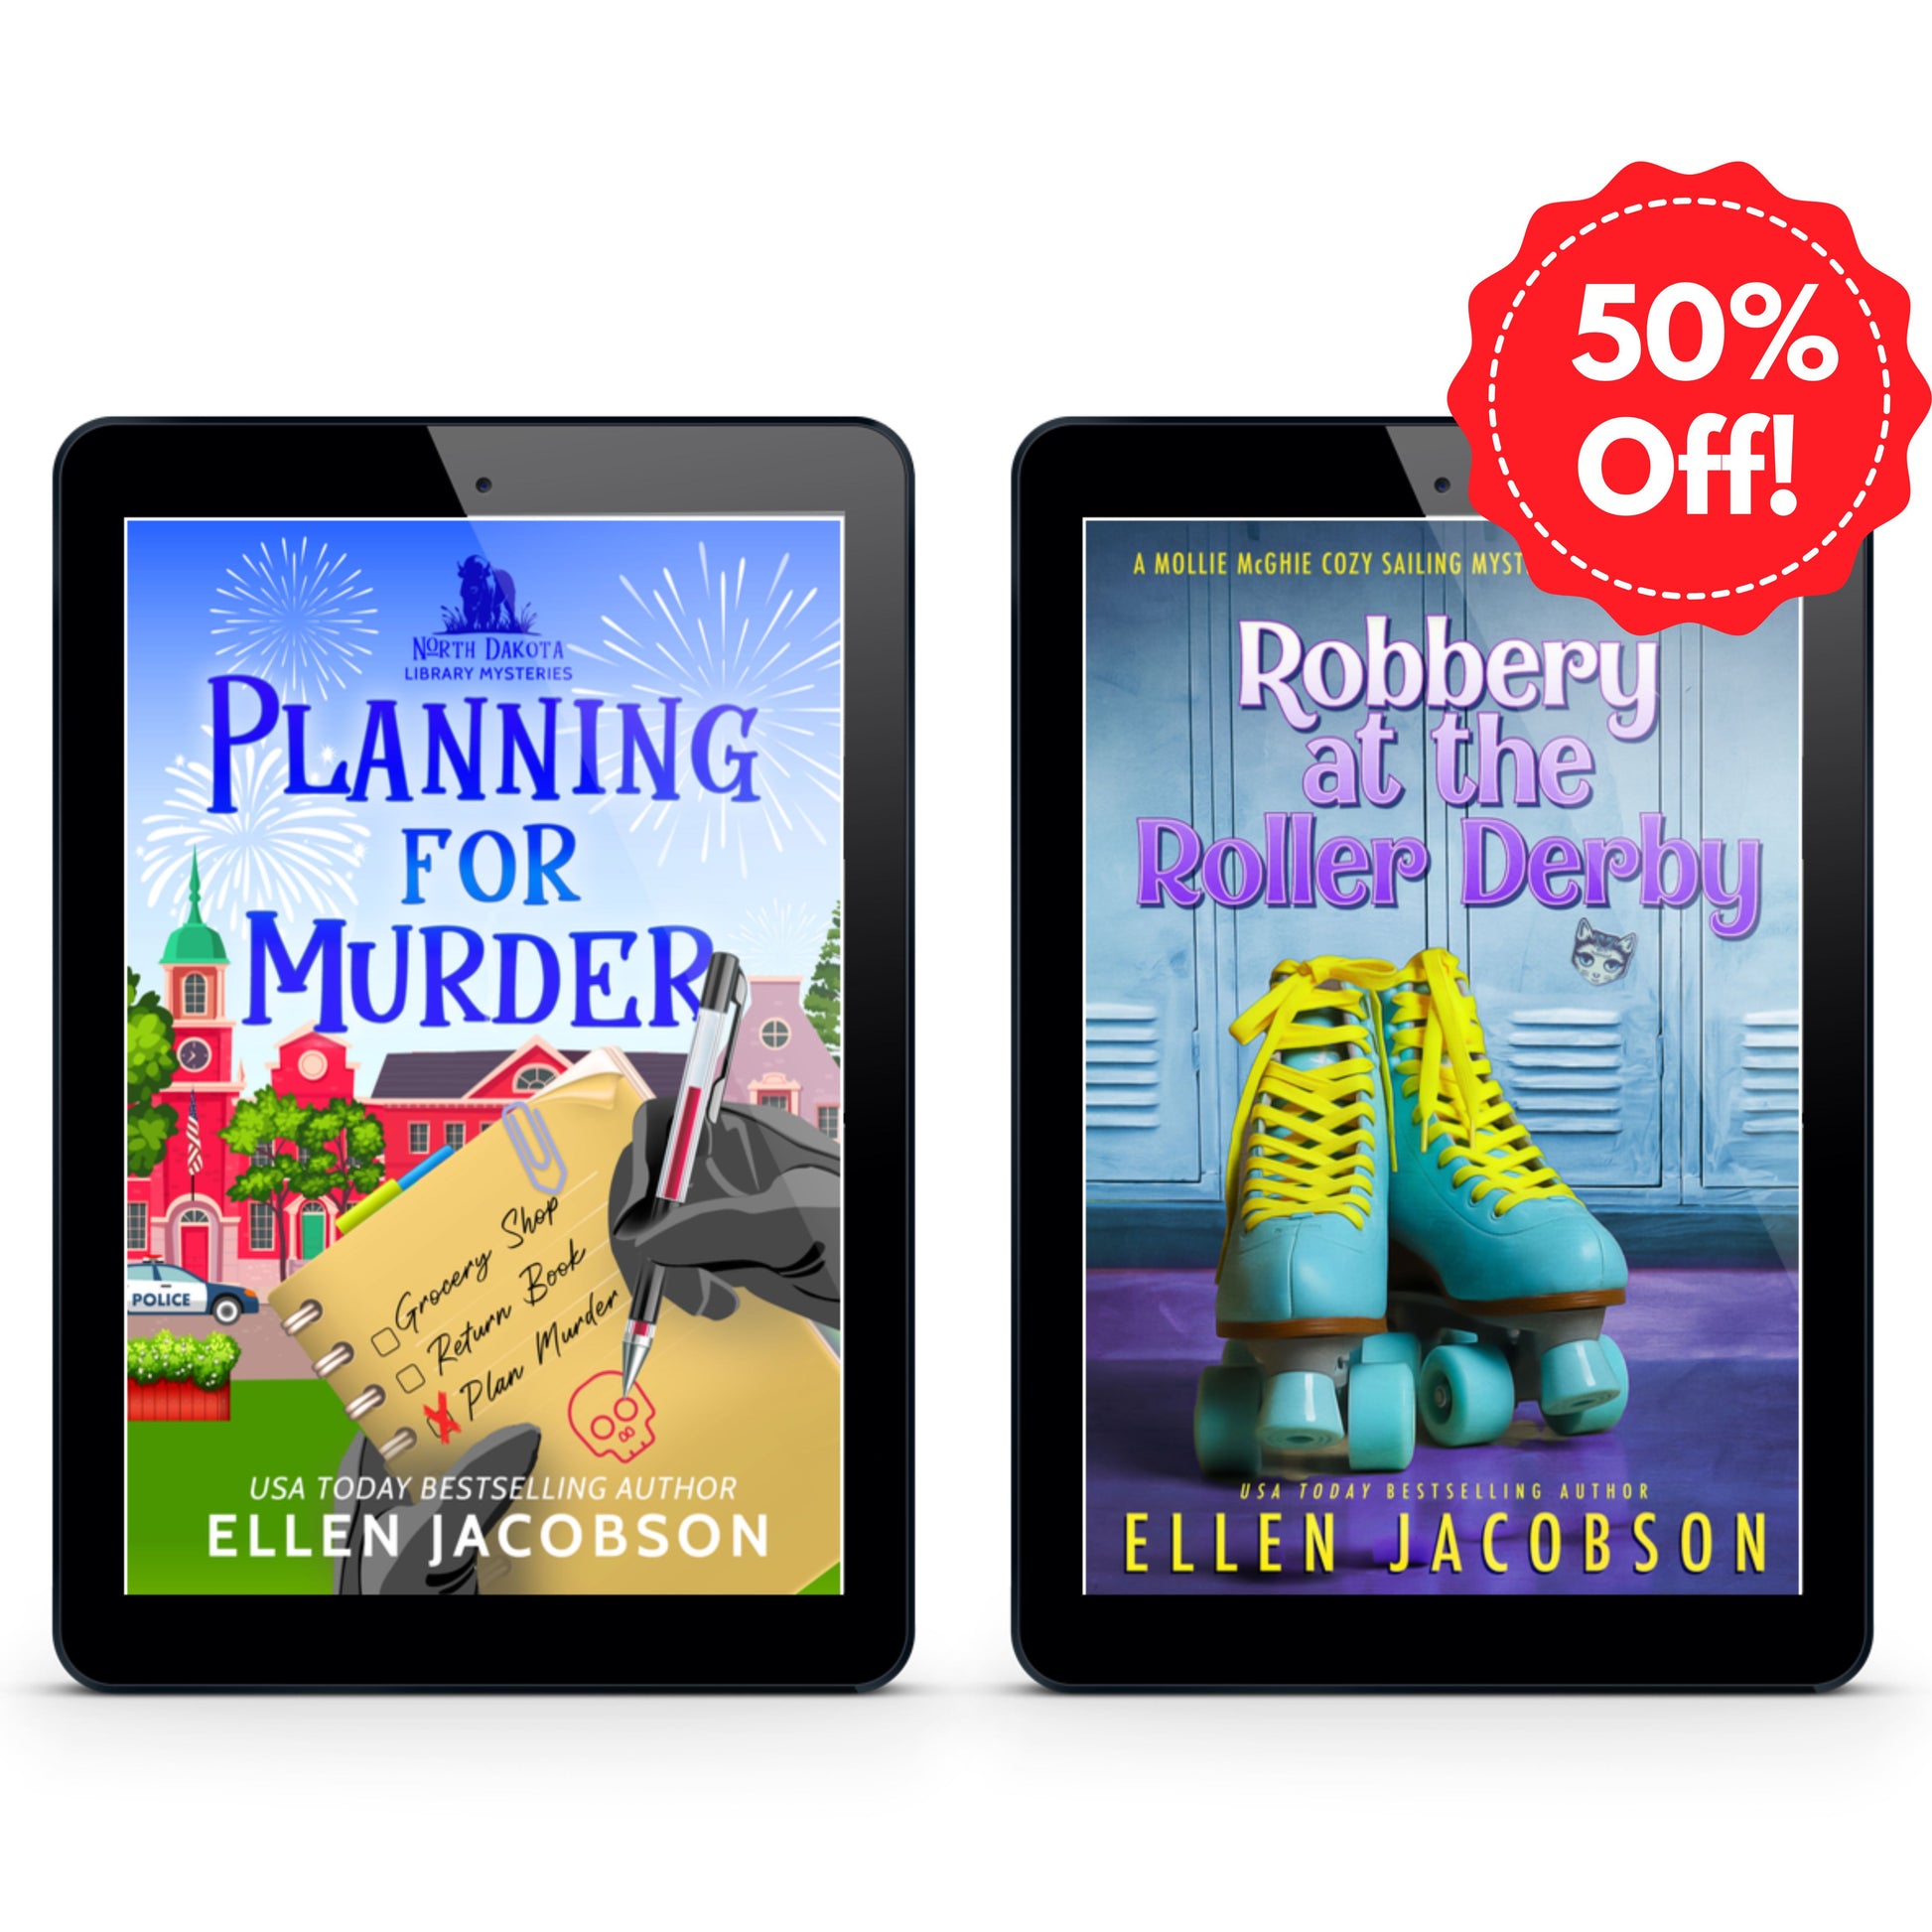 Image: Robbery at the Roller Derby and Planning for Murder Ebooks by Ellen Jacobson with 50% discount